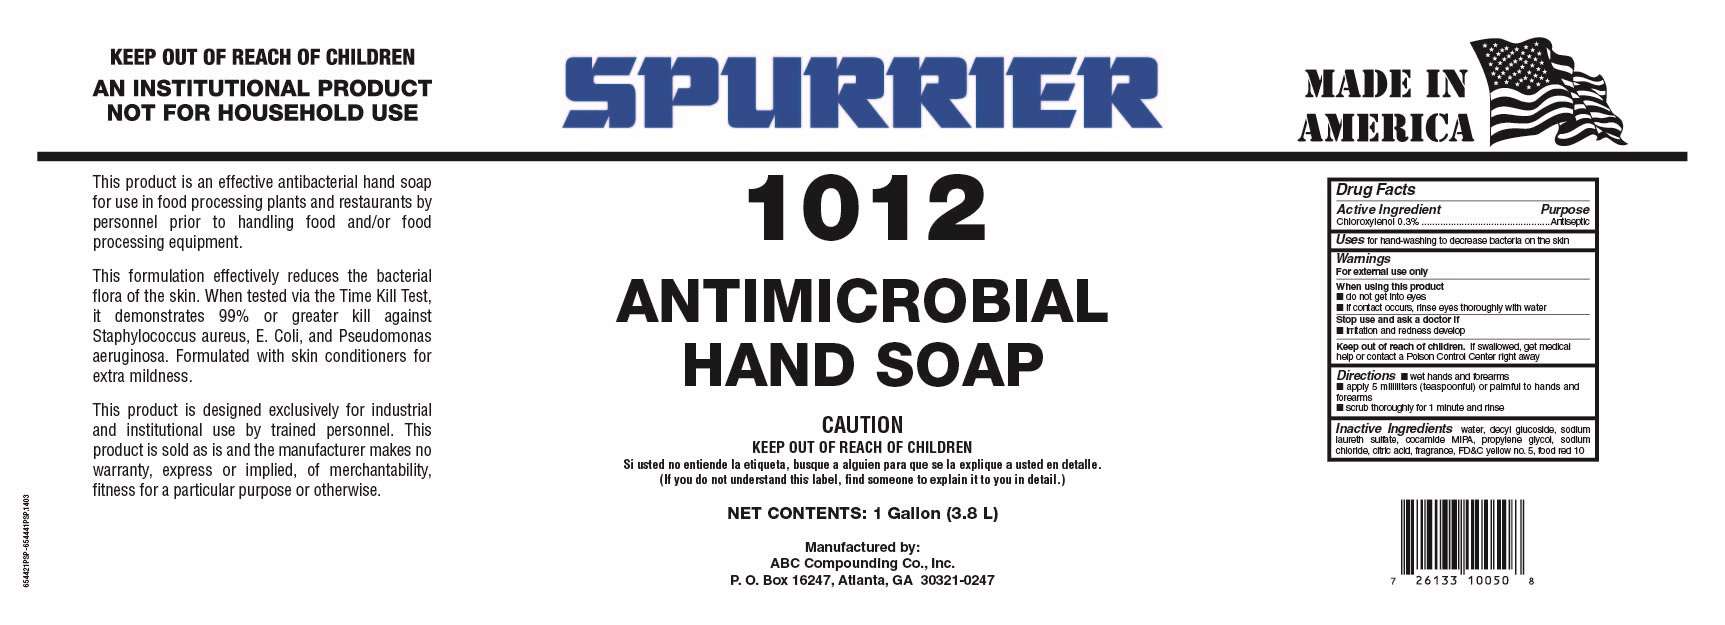 1012 Antimicrobial